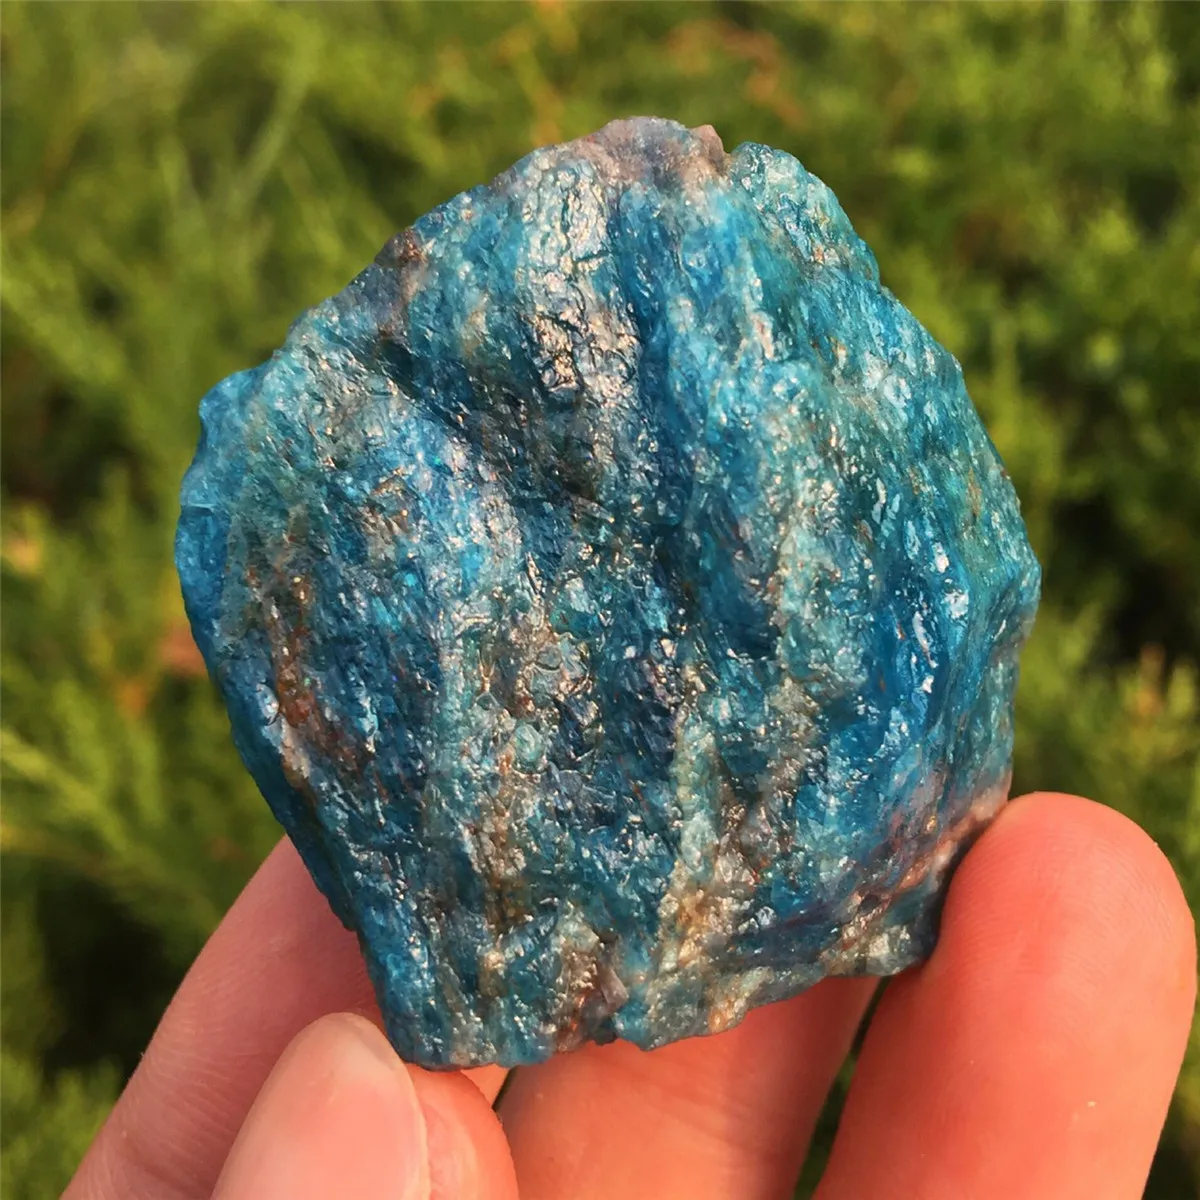 Rough Apatite crystals Mineral Specimen Blue Apatite on matrix 3.07 Natural Blue Apatite Collection Sample from Russia